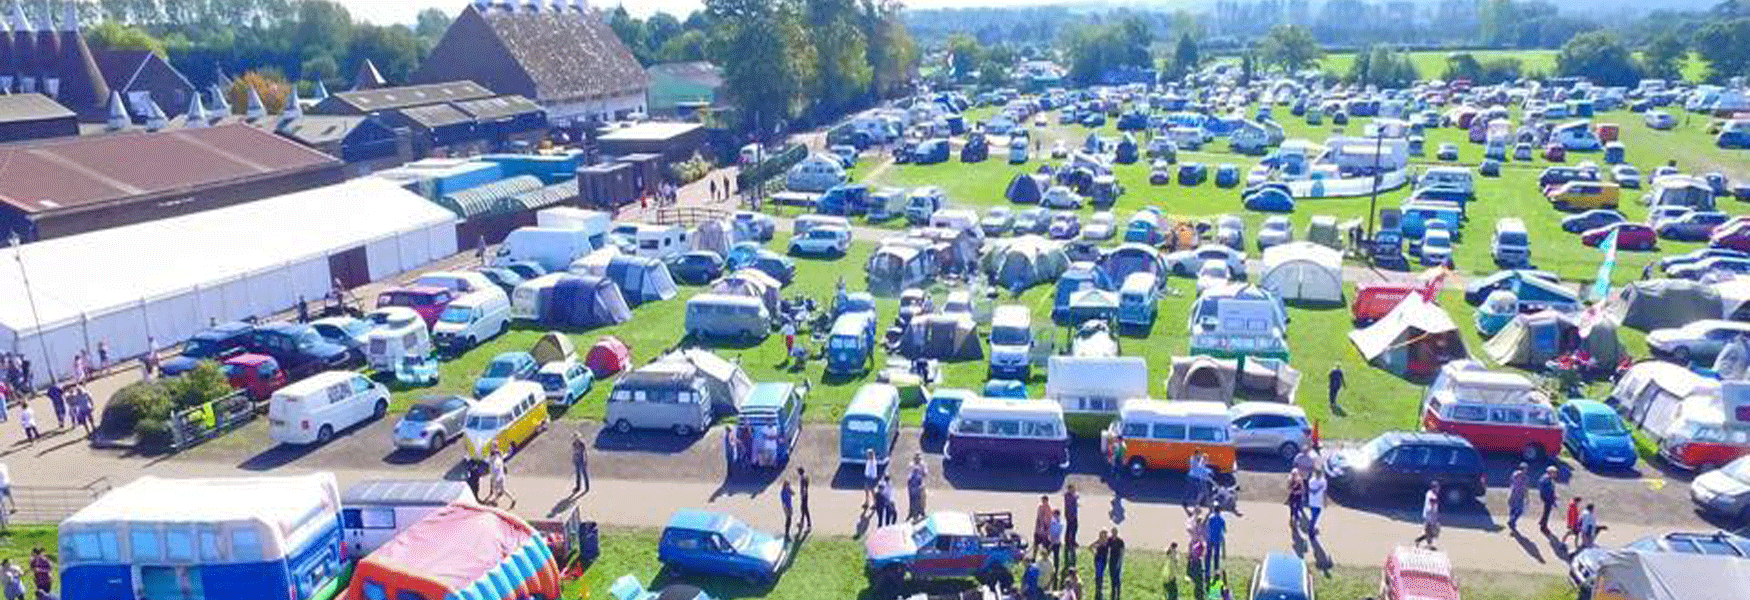 Chill and Grill Festival at The Hop Farm, Paddock Wood